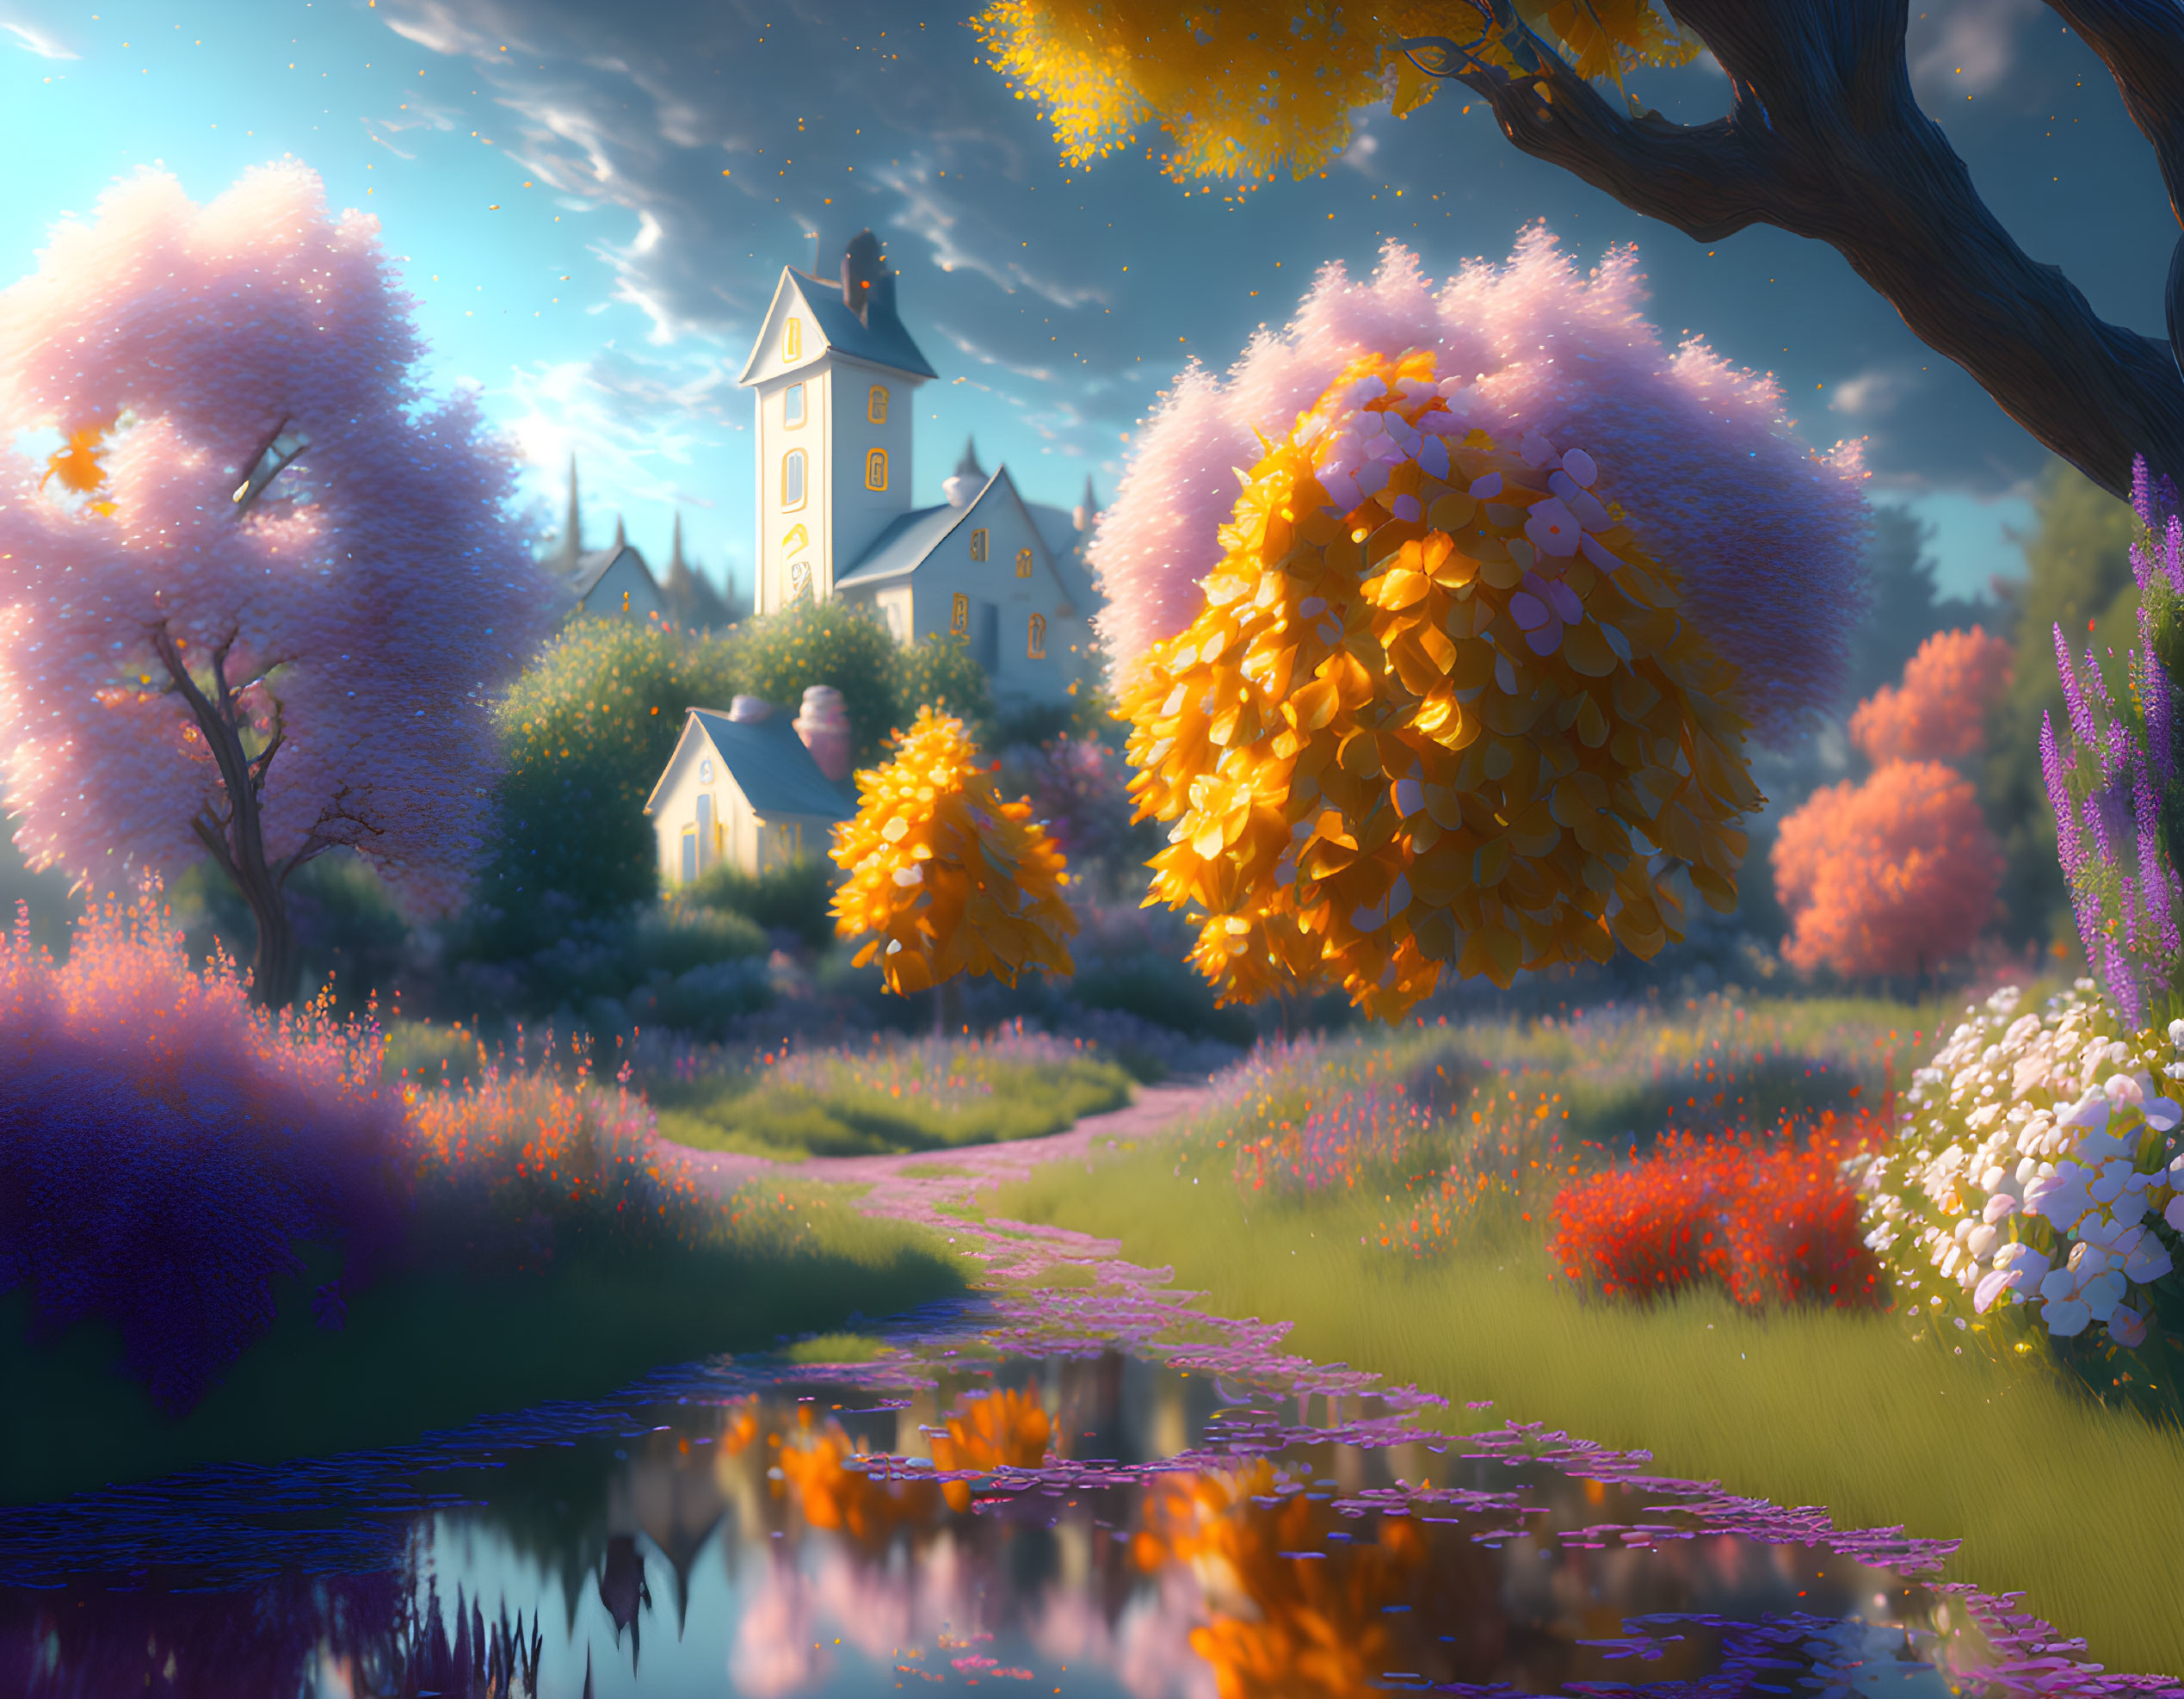 Vibrant flowers, autumn trees, reflective pond, and quaint house in warm sunset light